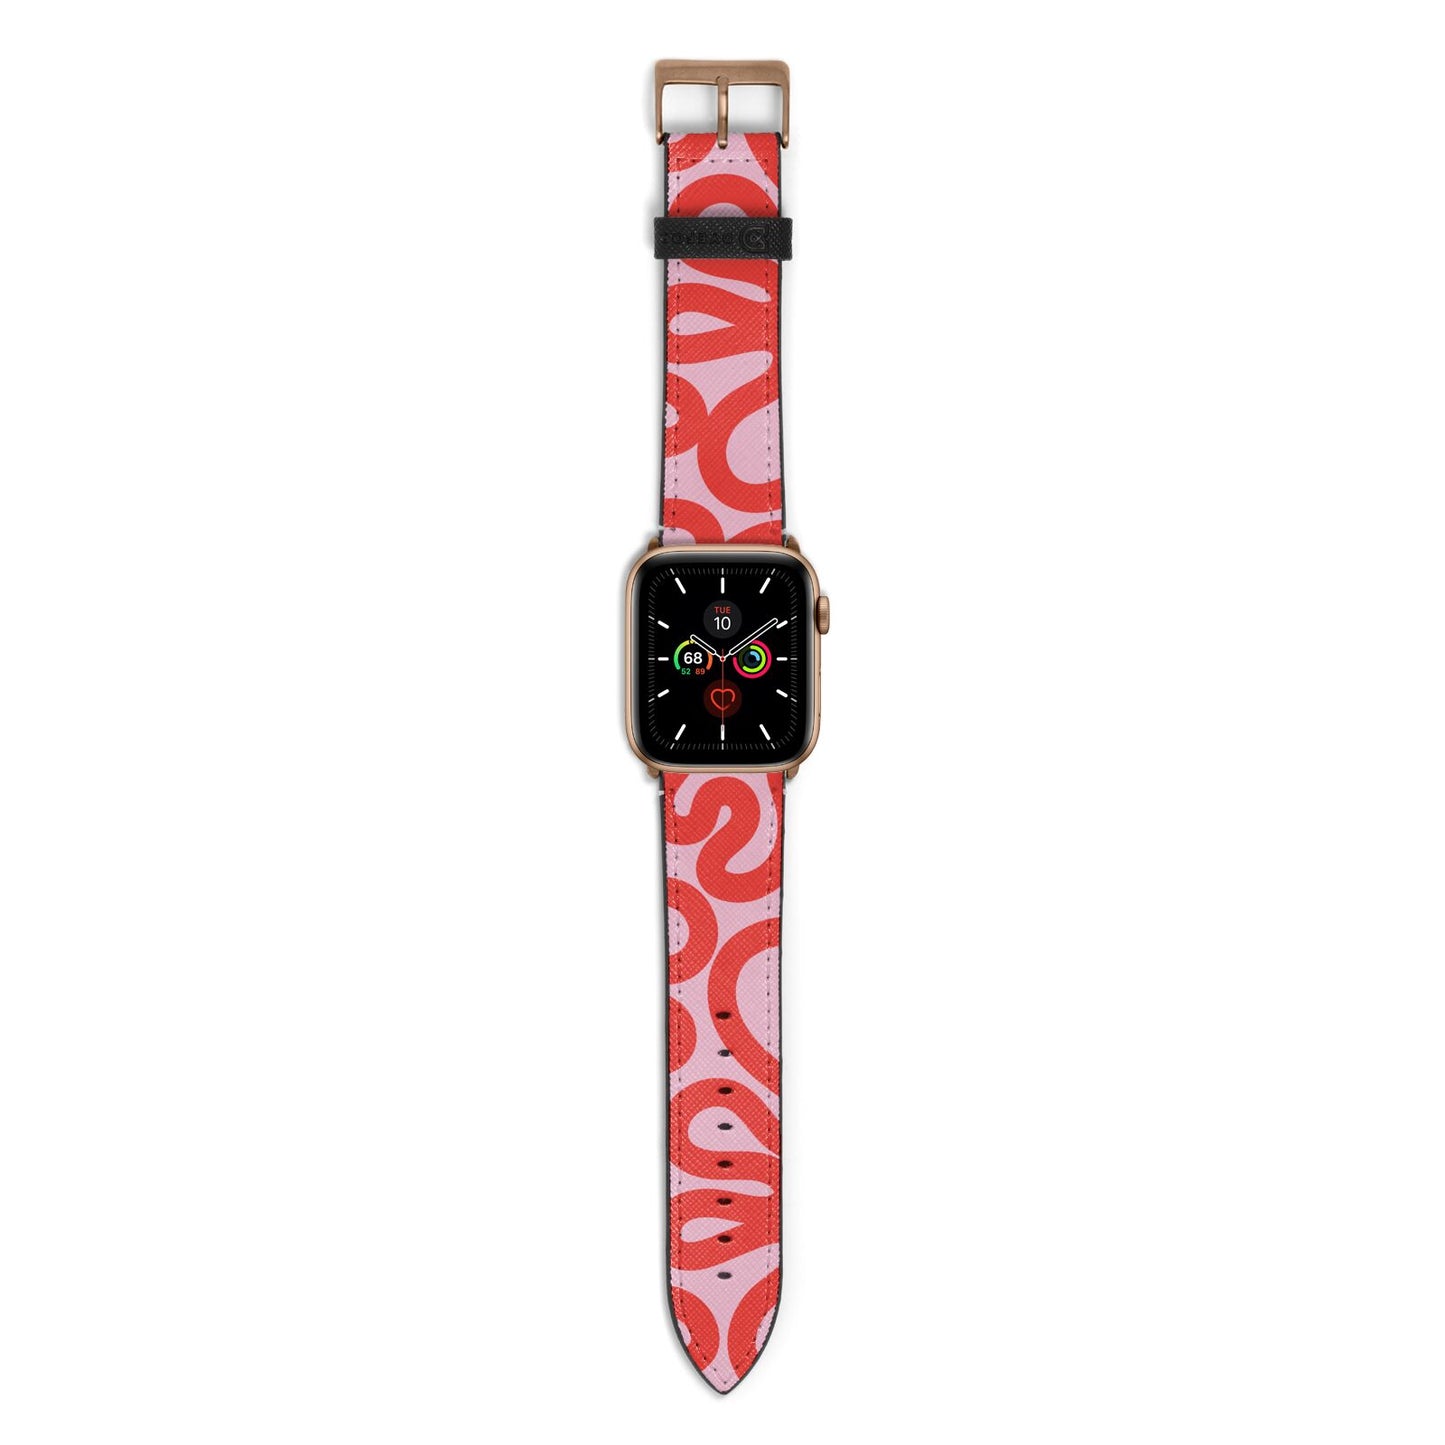 Squiggle Apple Watch Strap with Gold Hardware